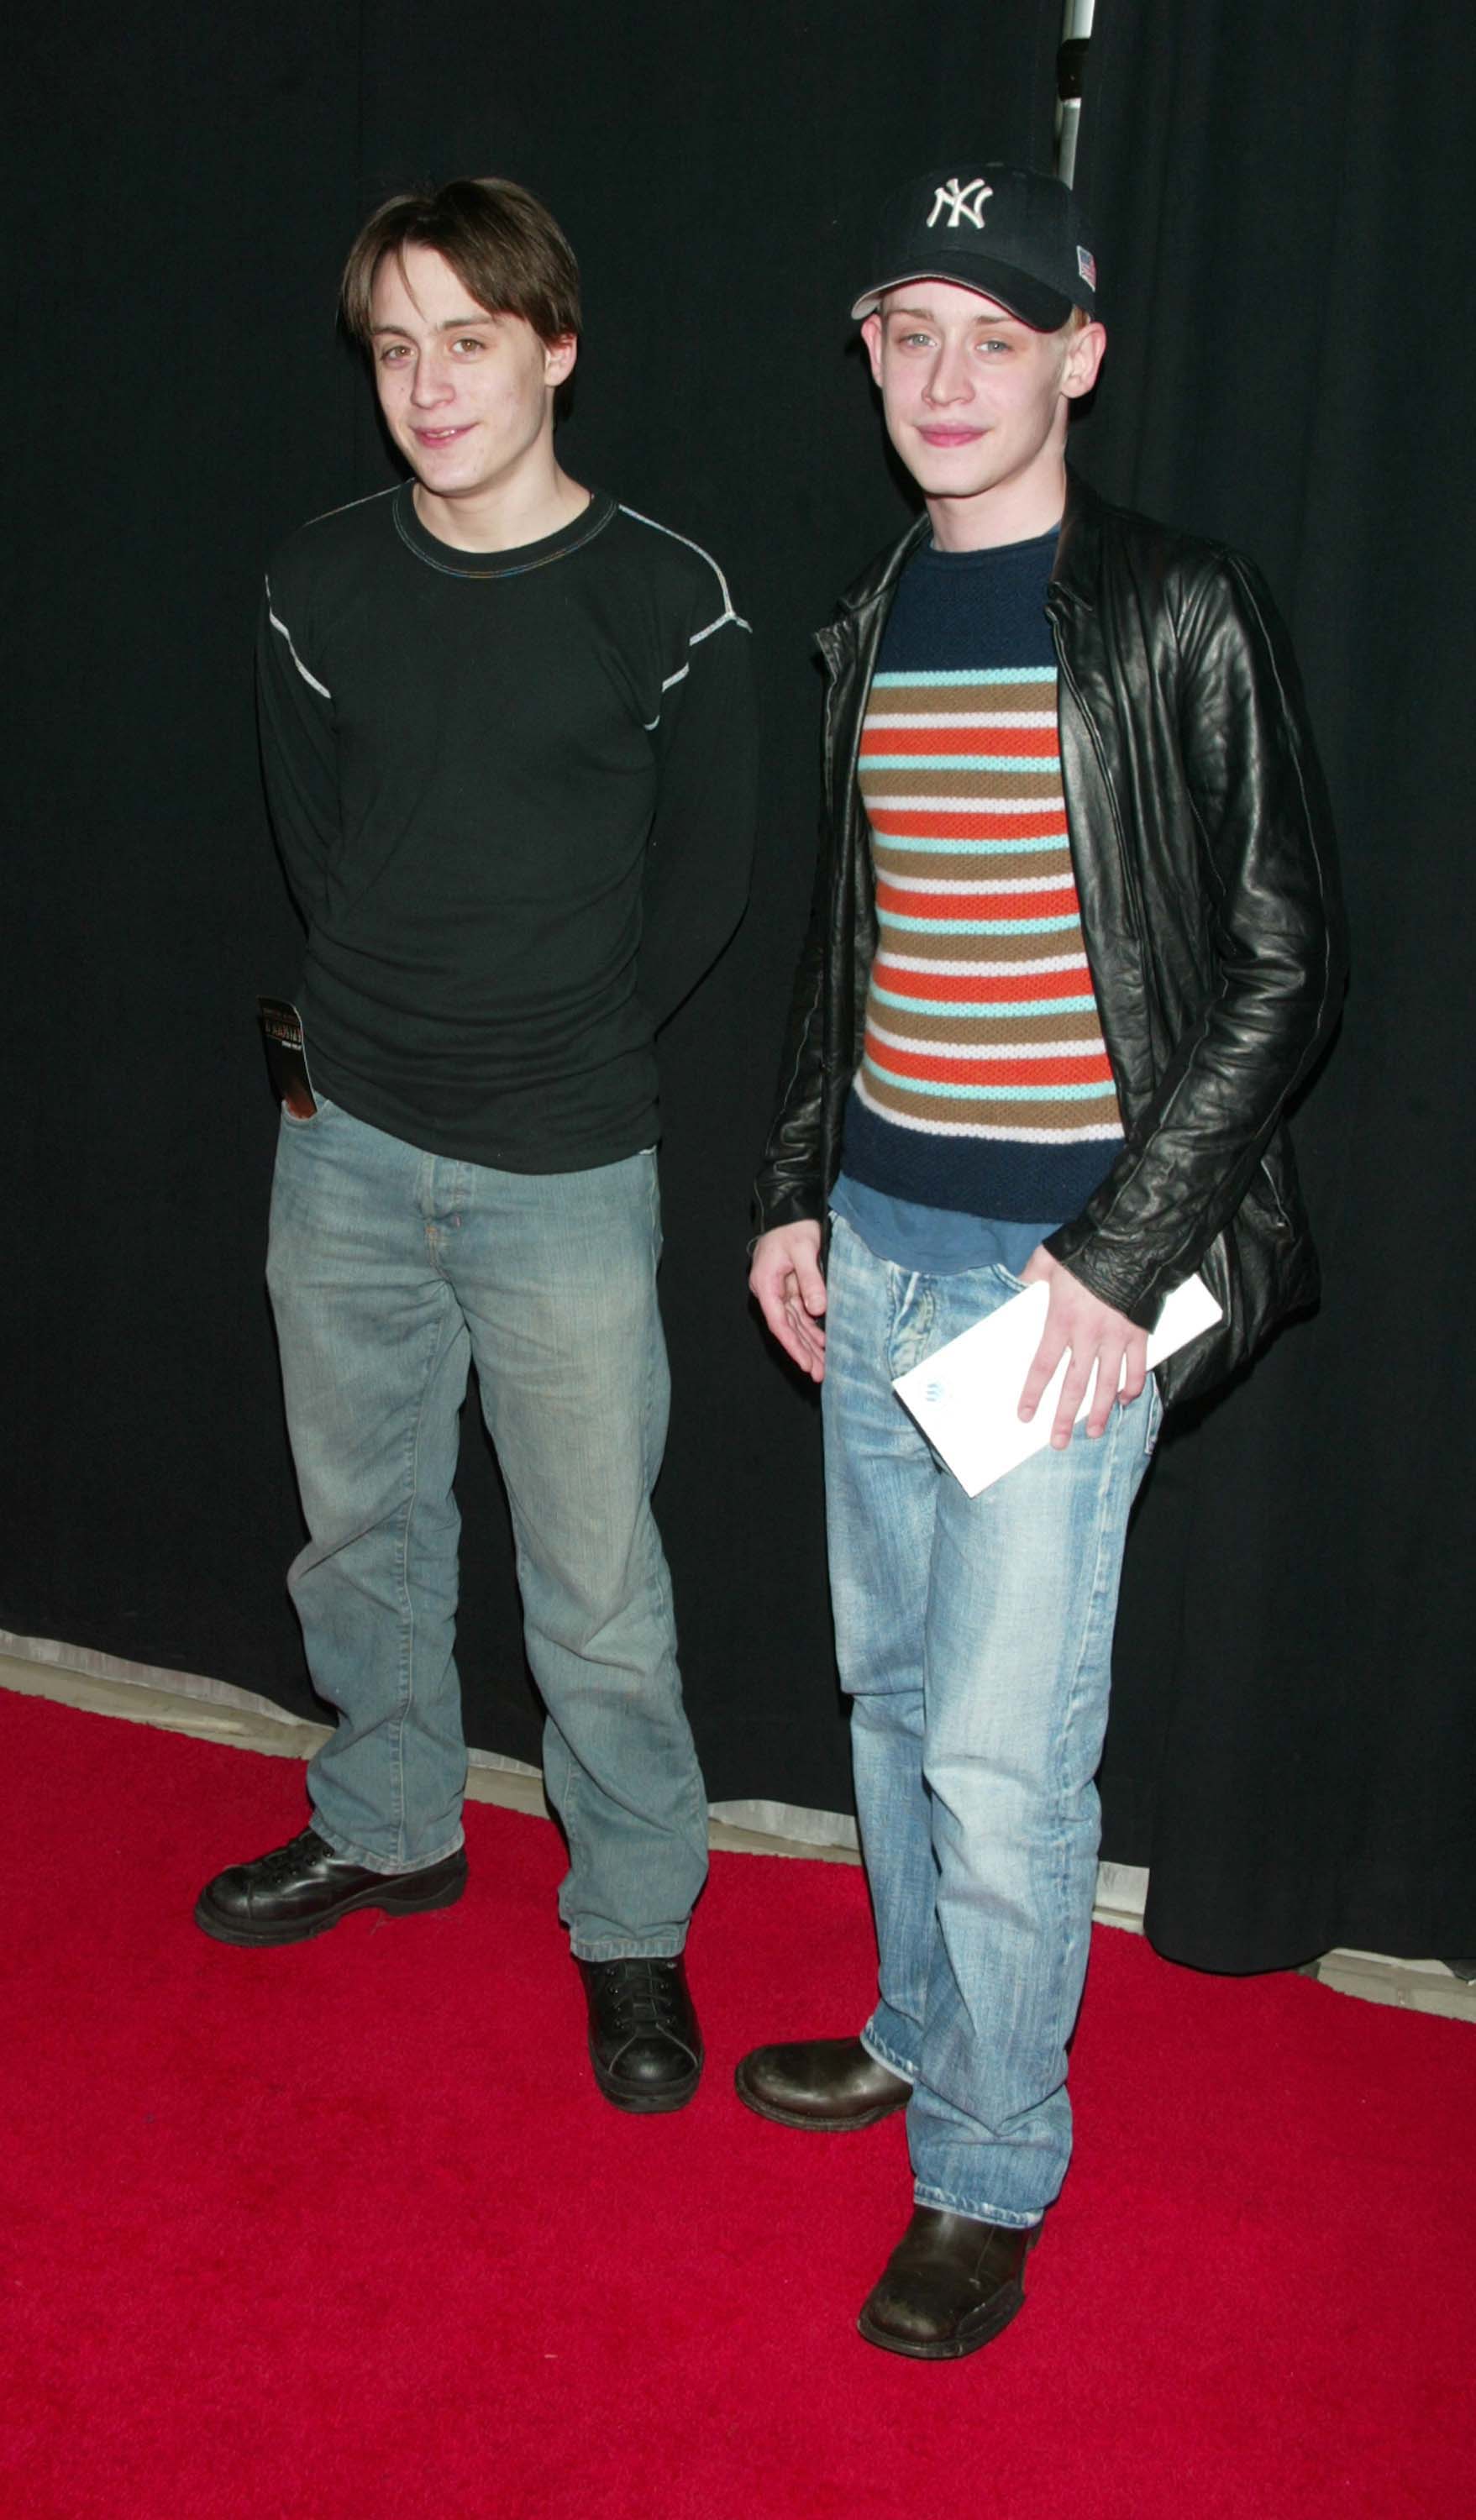 Kieran and Macaulay Culkin at the "Star Wars: Episode II - Attack of the Clones" premiere in New York City in 2002. | Source: Getty Images